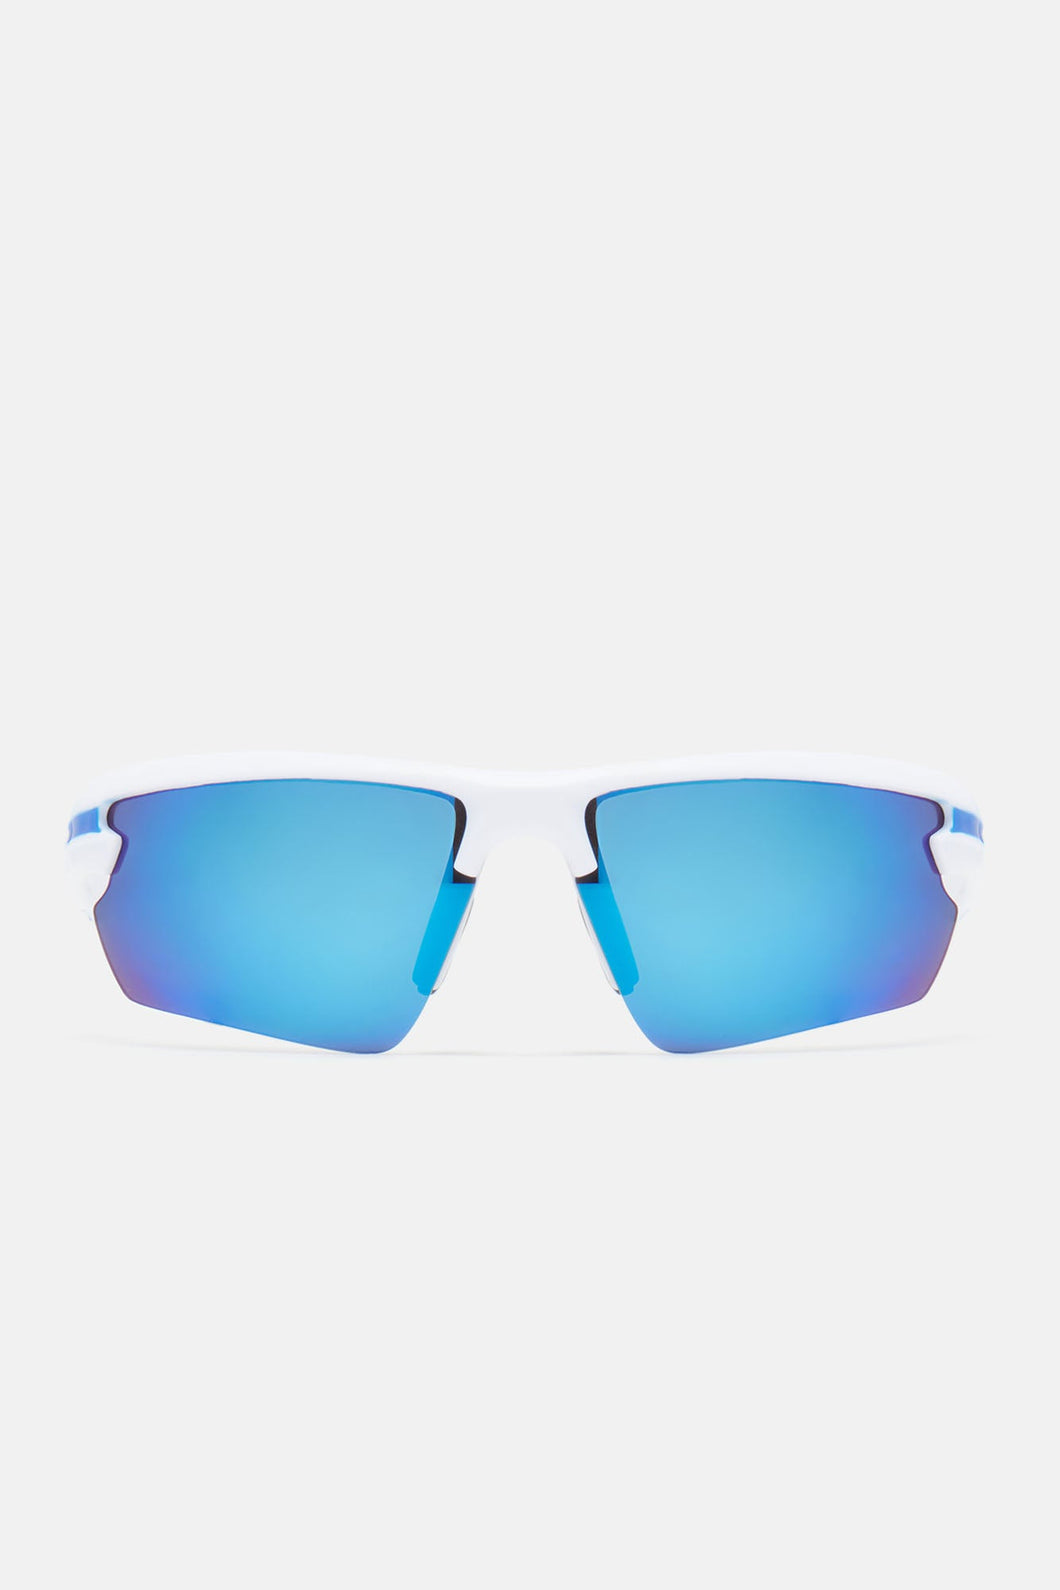 Dreaming Of You Sunglasses - White/Blue